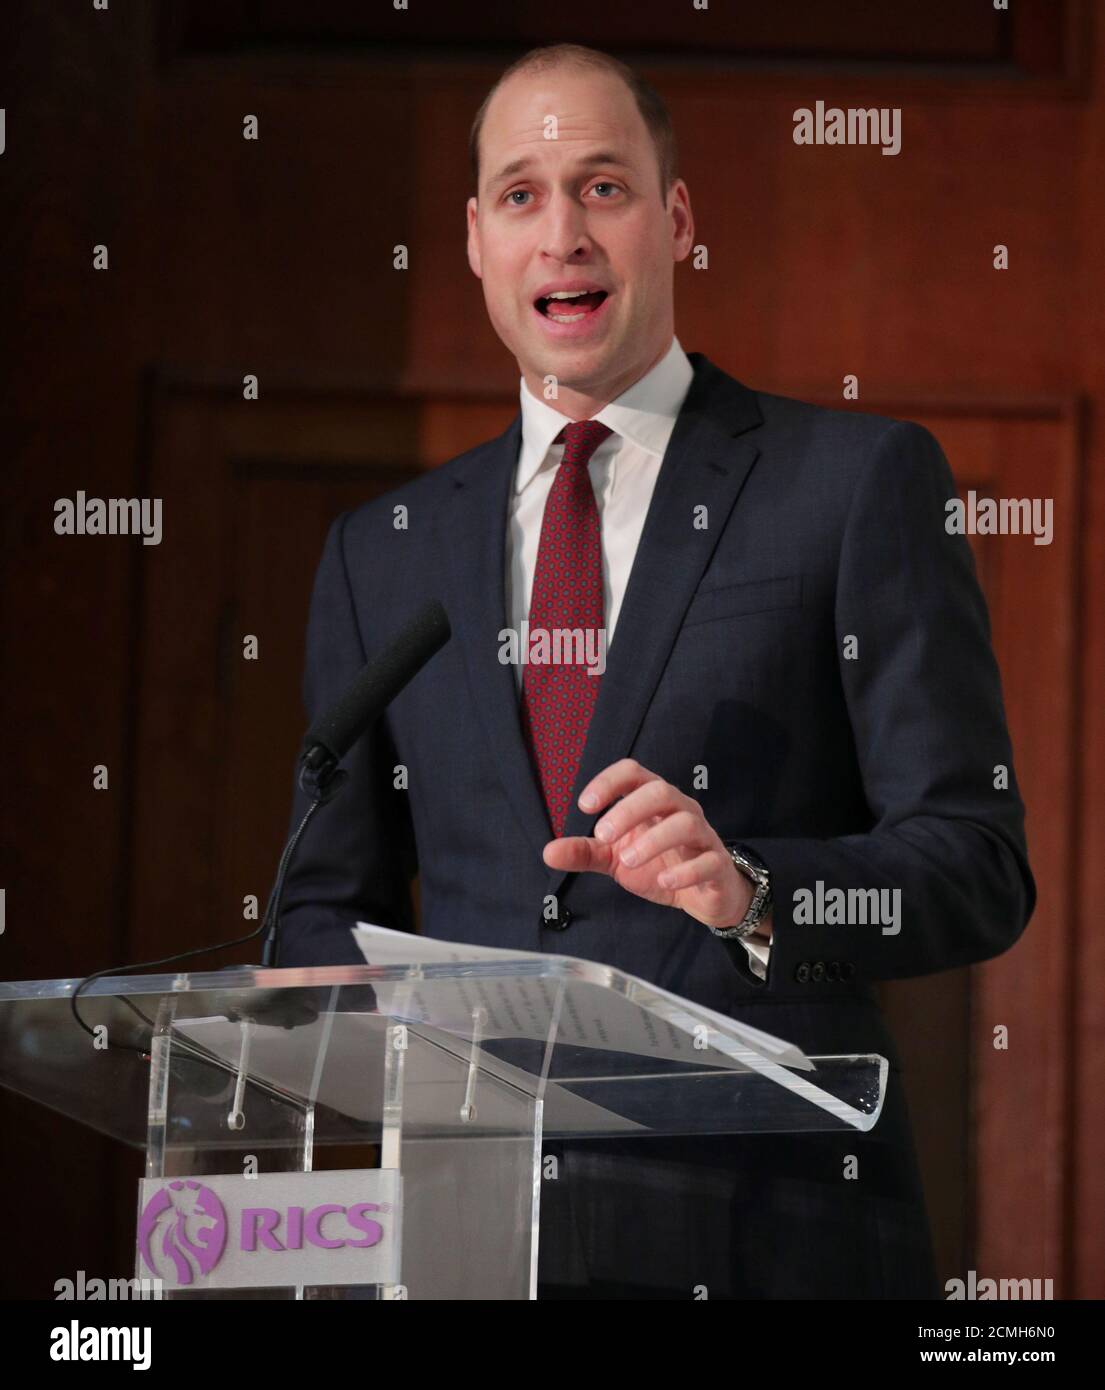 Britain's Prince William speaks at the launch of LandAid's Pledge150 campaign at the Royal Institution of Chartered Surveyors, in London, Britain, November 17, 2017. REUTERS/Yui Mok/Pool Stock Photo